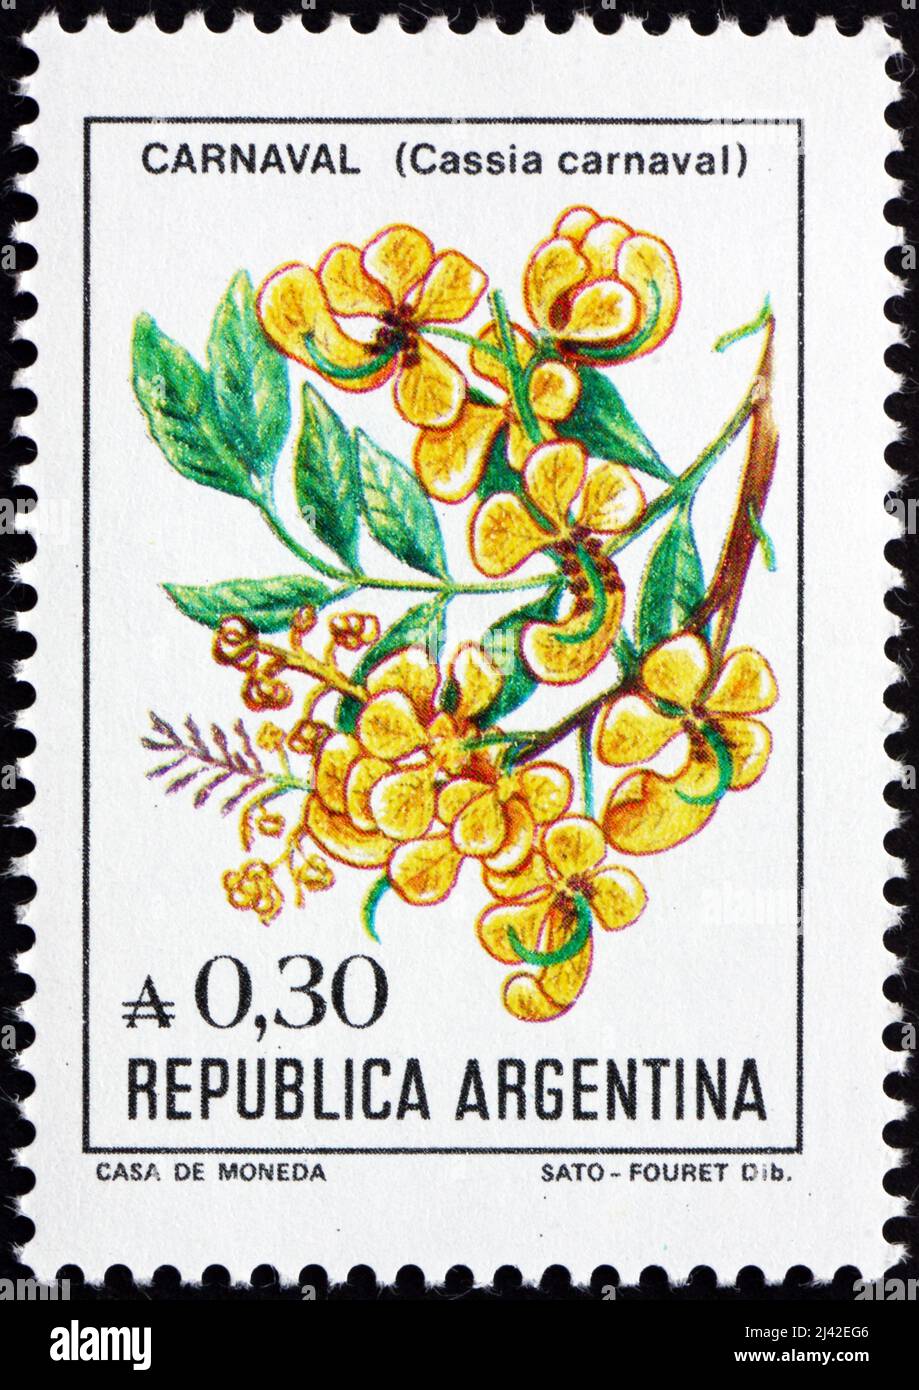 ARGENTINA - CIRCA 1985: a stamp printed in the Argentina shows Carnaval, Cassia Carnaval, Flowering Tree, circa 1985 Stock Photo